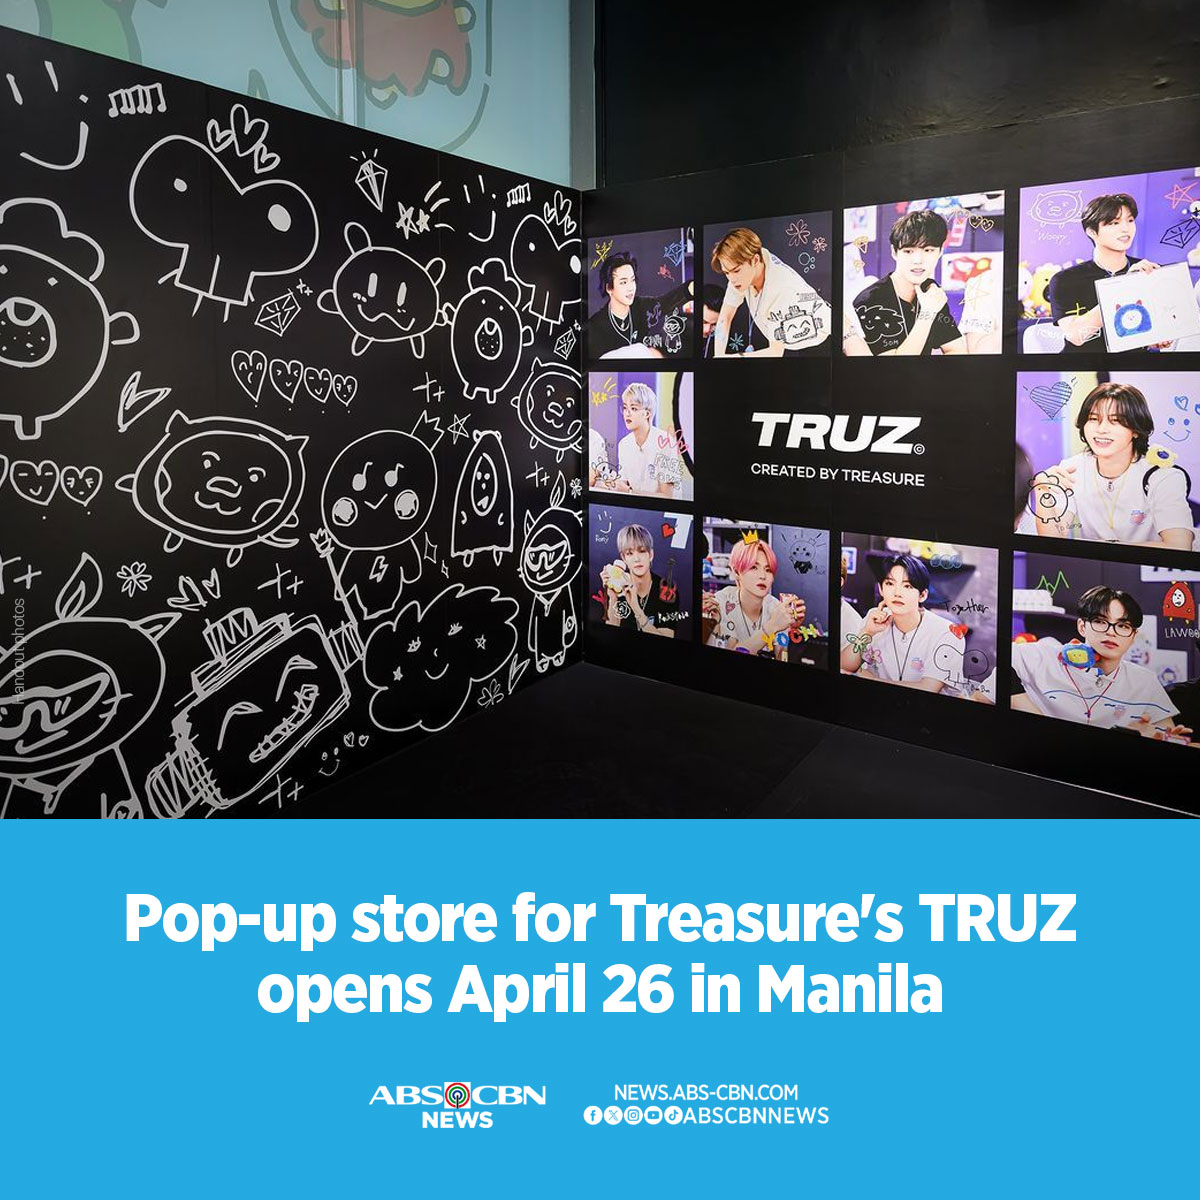 Heads up, Filo Treasure Makers! A pop-up store featuring merchandise designed by the members of K-pop boy band Treasure is opening in Manila this Friday, April 26. #HallyuCorner To know the exact location, read more: abscbn.news/4b9FKUK